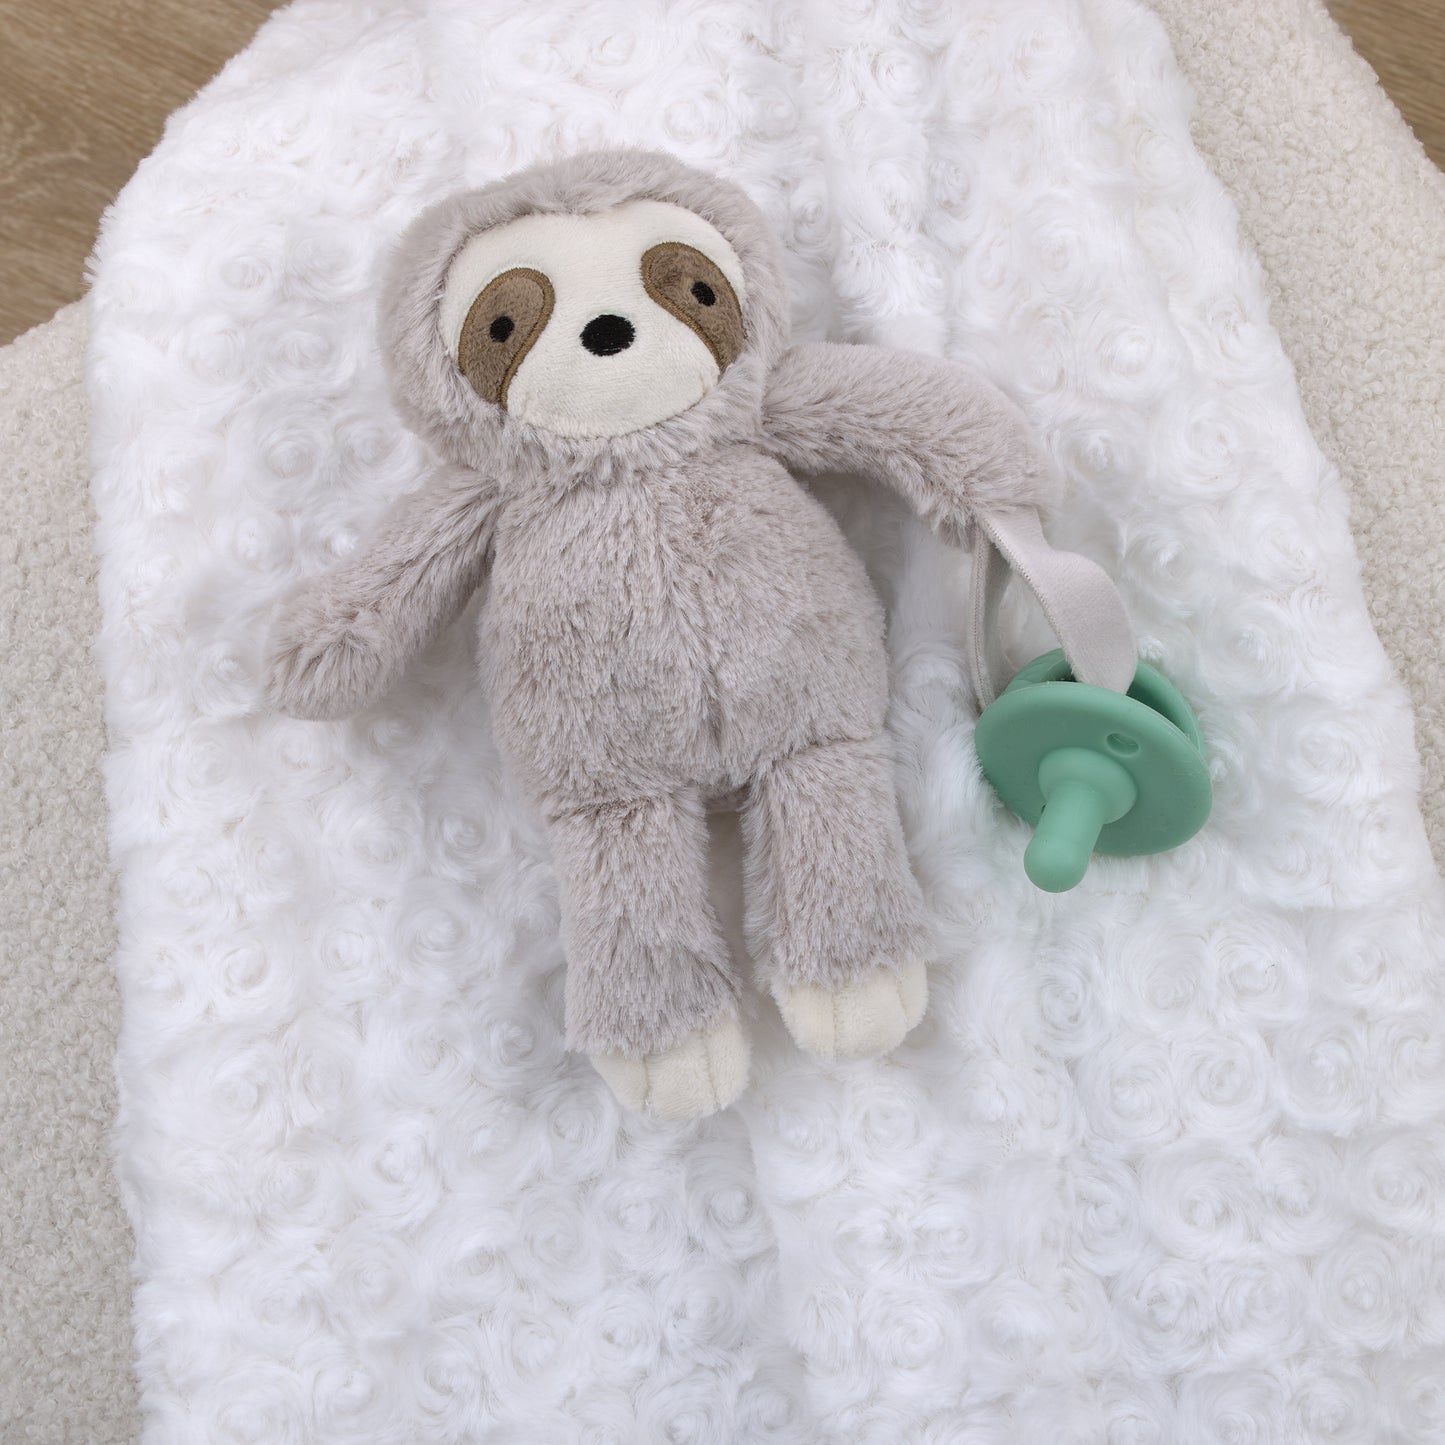 Little Love by NoJo Sloth Shaped Grey and White Plush Pacifier Buddy